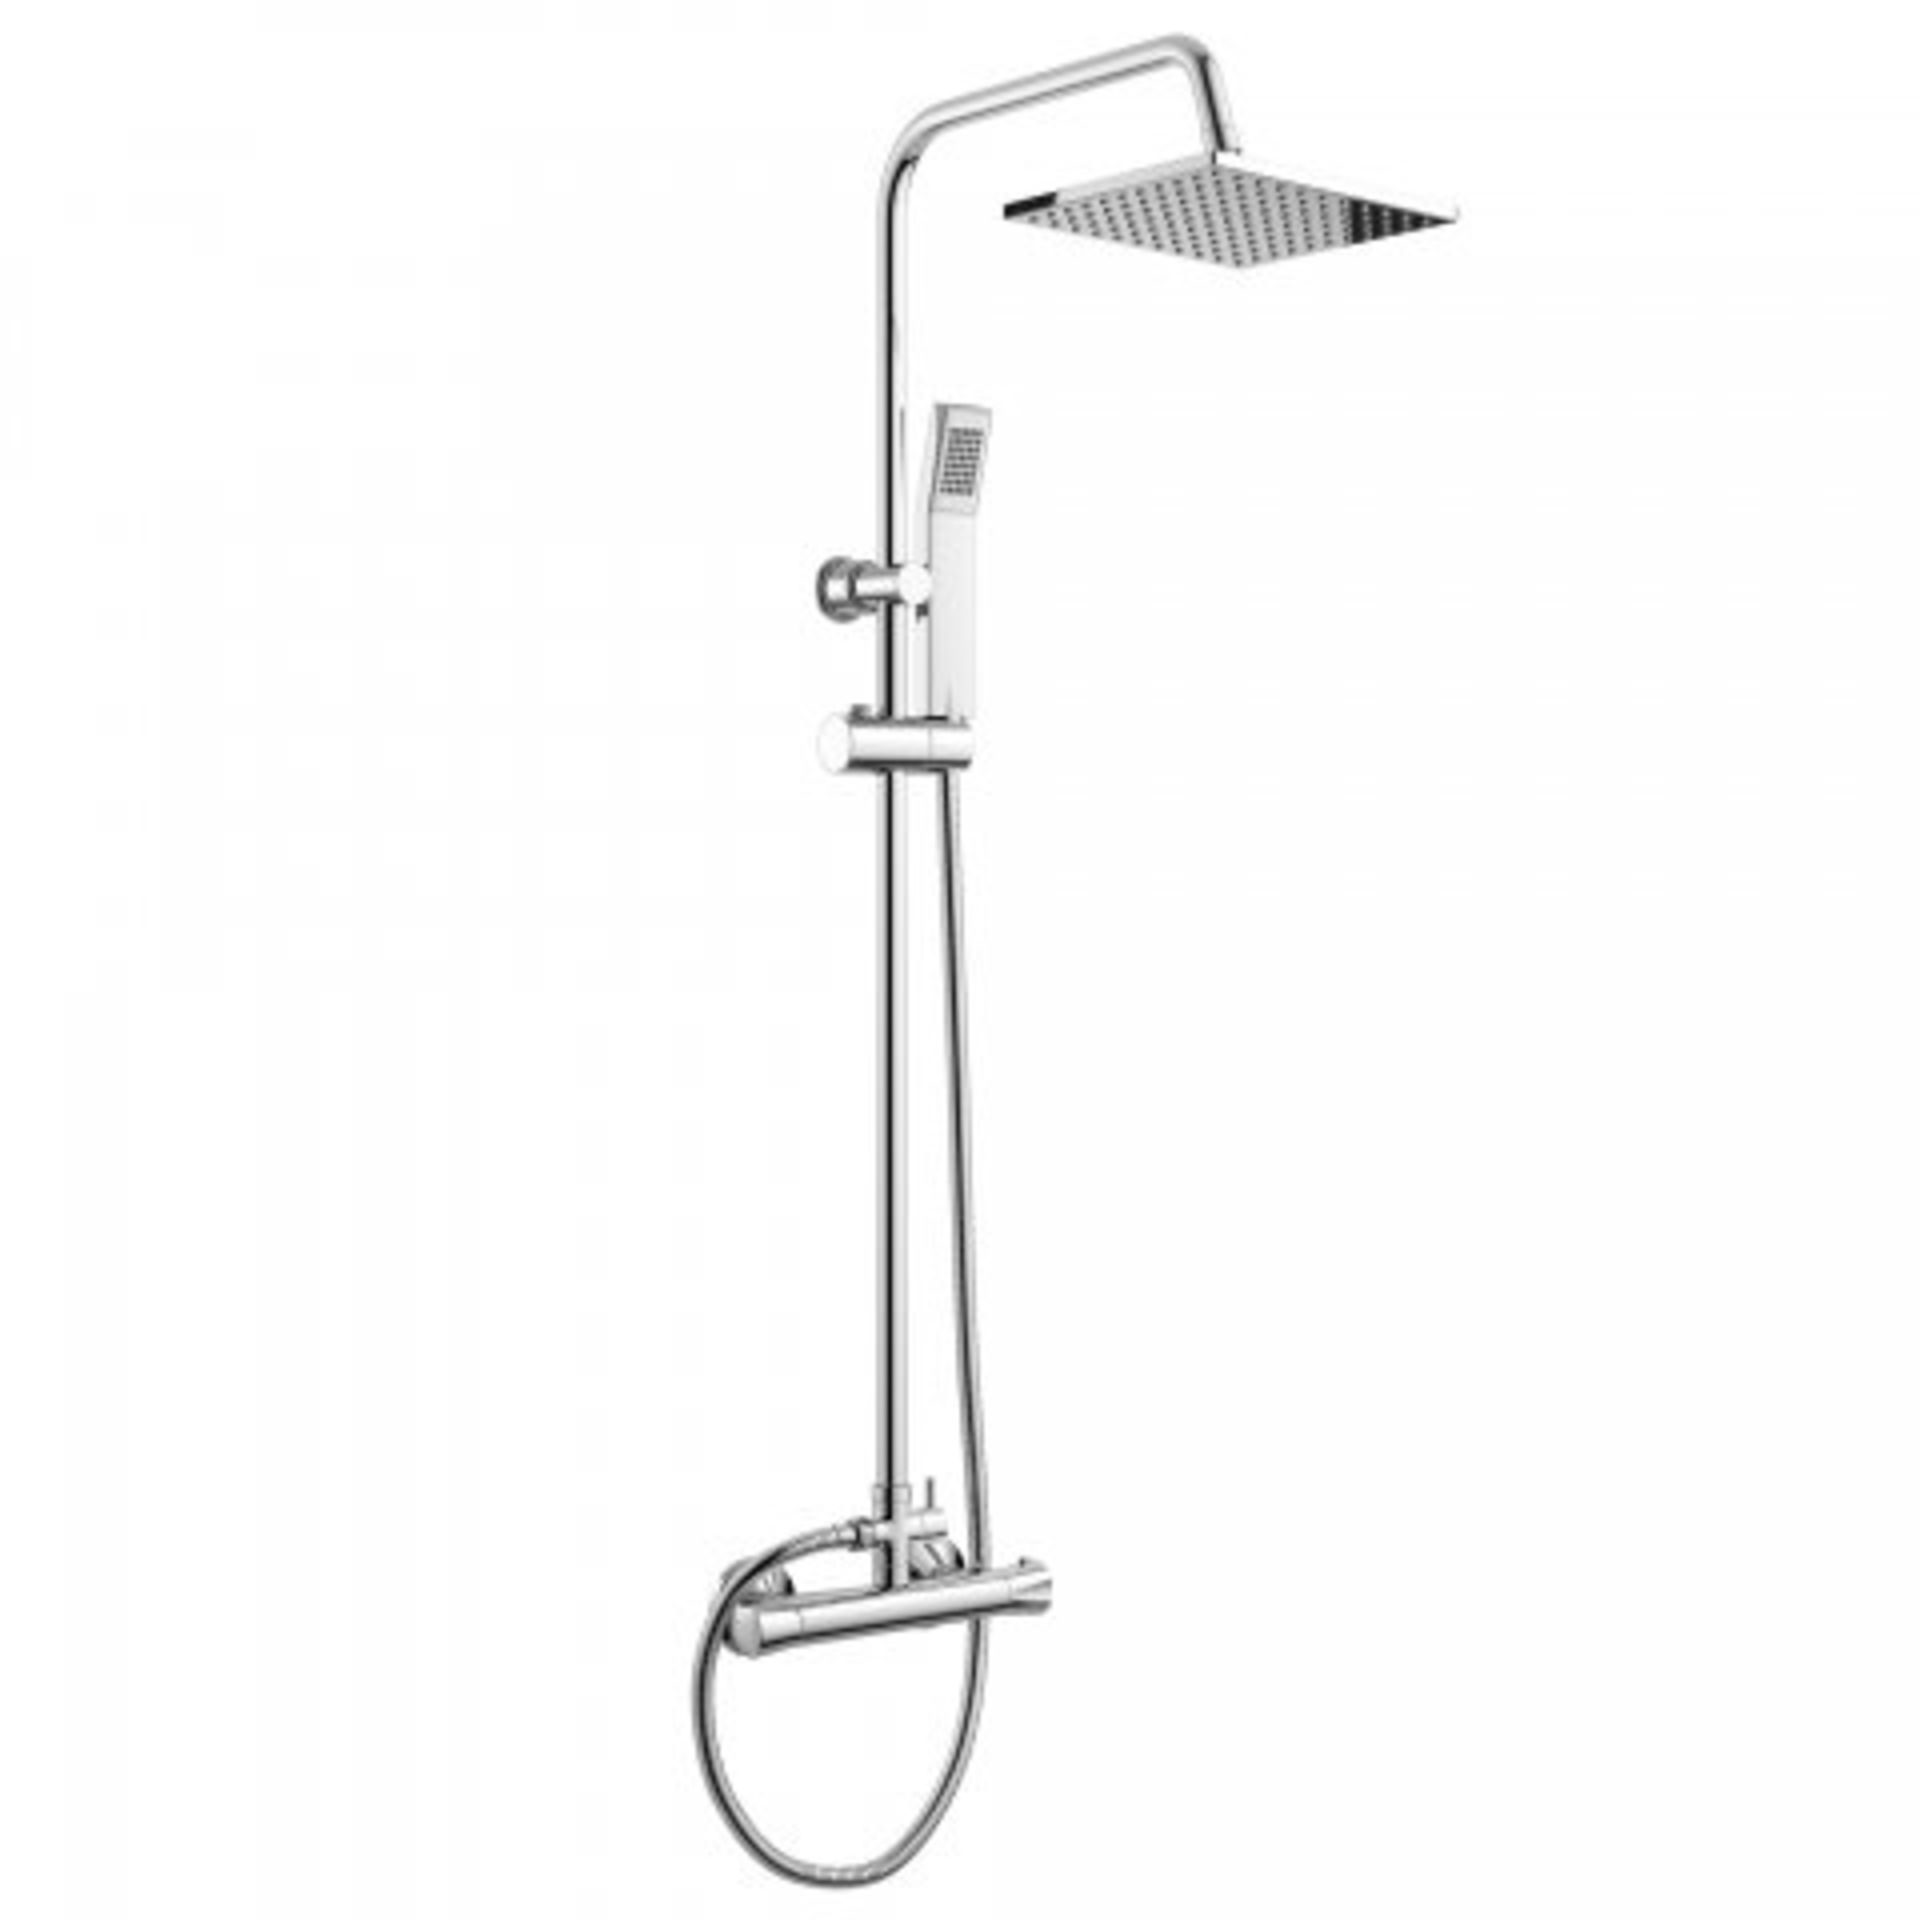 (P41) 200mm Square Head Thermostatic Exposed Shower Kit & Hand Held. RRP £249.99. Simplistic Style - Image 5 of 6